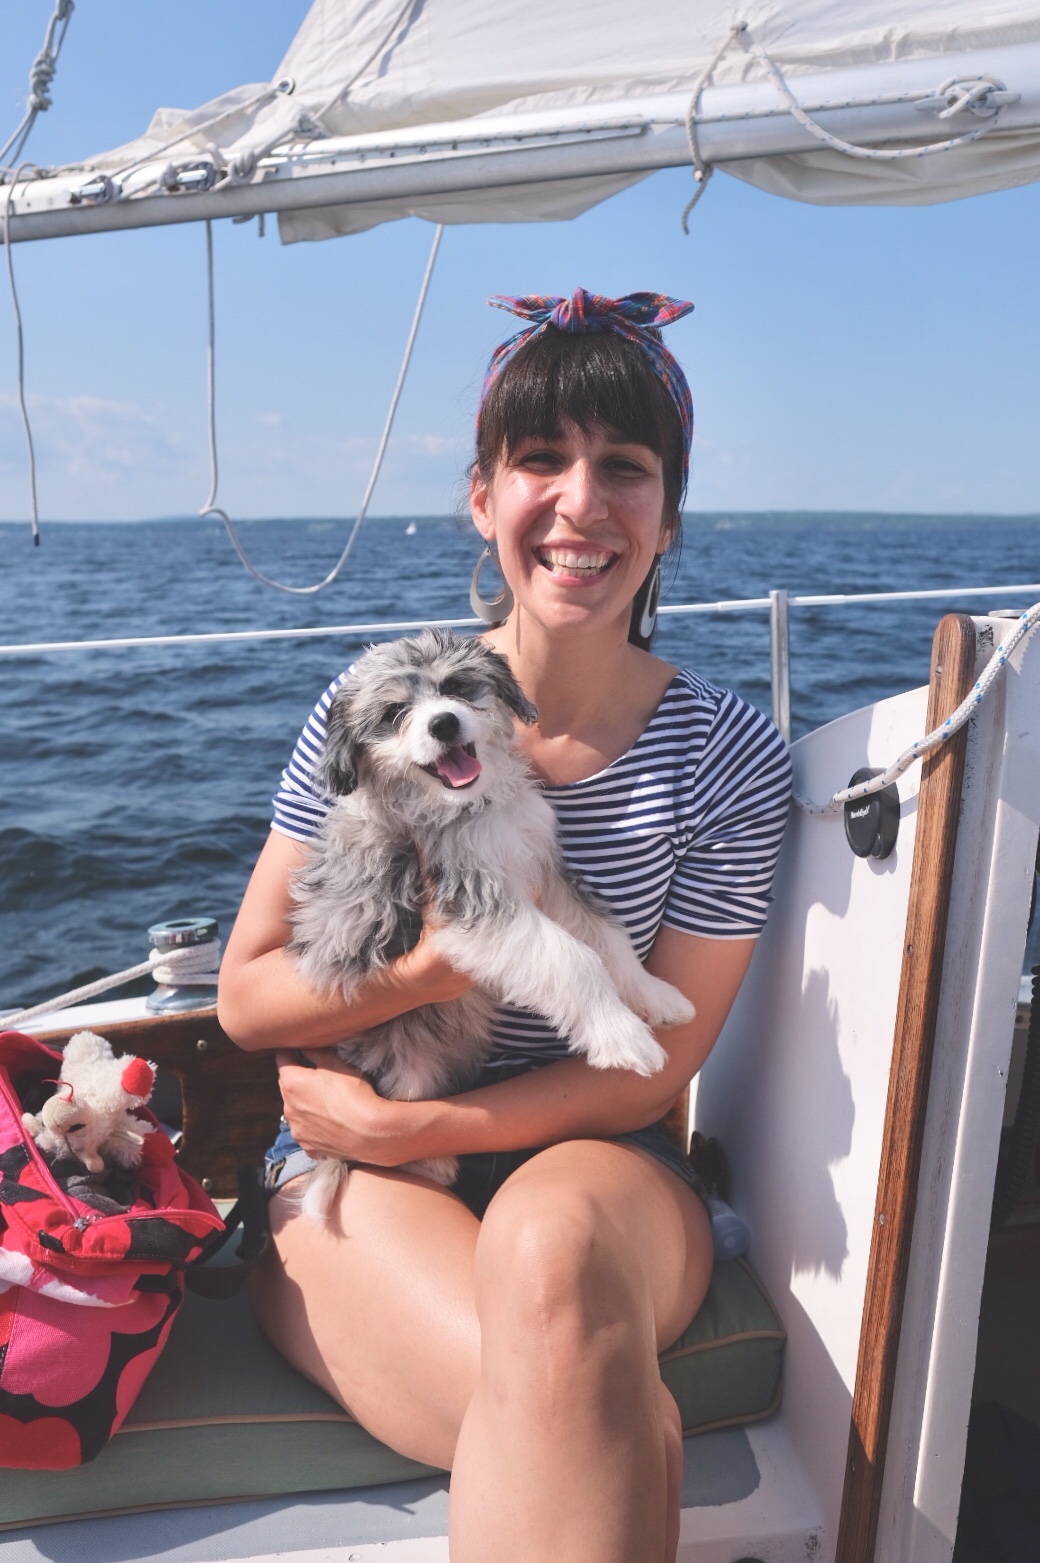 Smiling woman on a sailboat wearing headband with smiling AussieDoodle puppy.